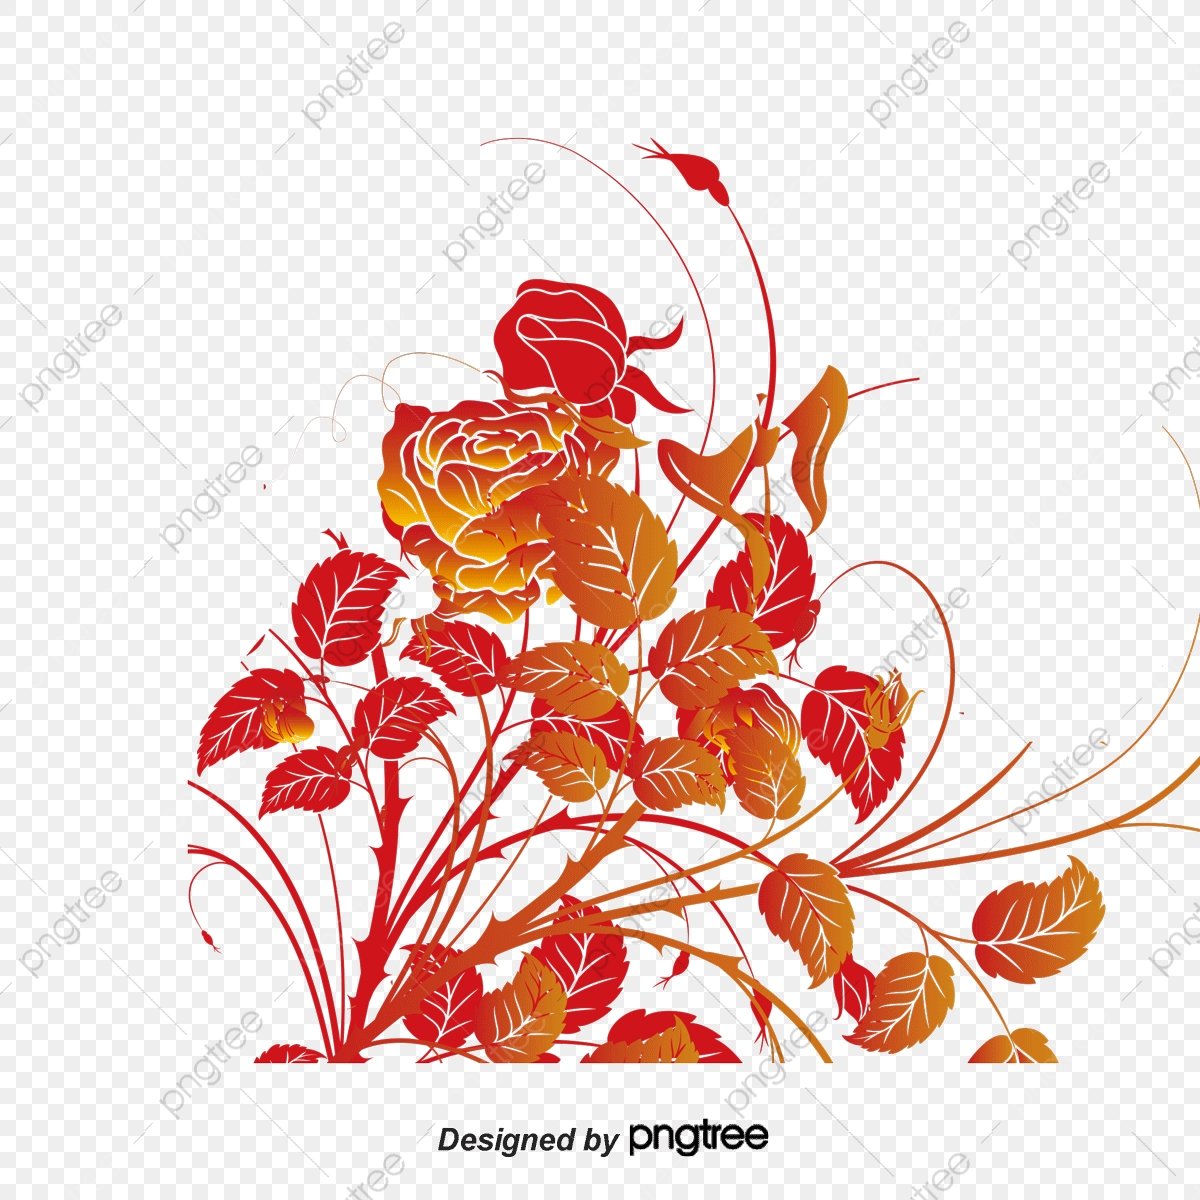 Embroidery Patterns Free Vector Embroidery Patterns Plant Flowers Embroidery Patterns Png